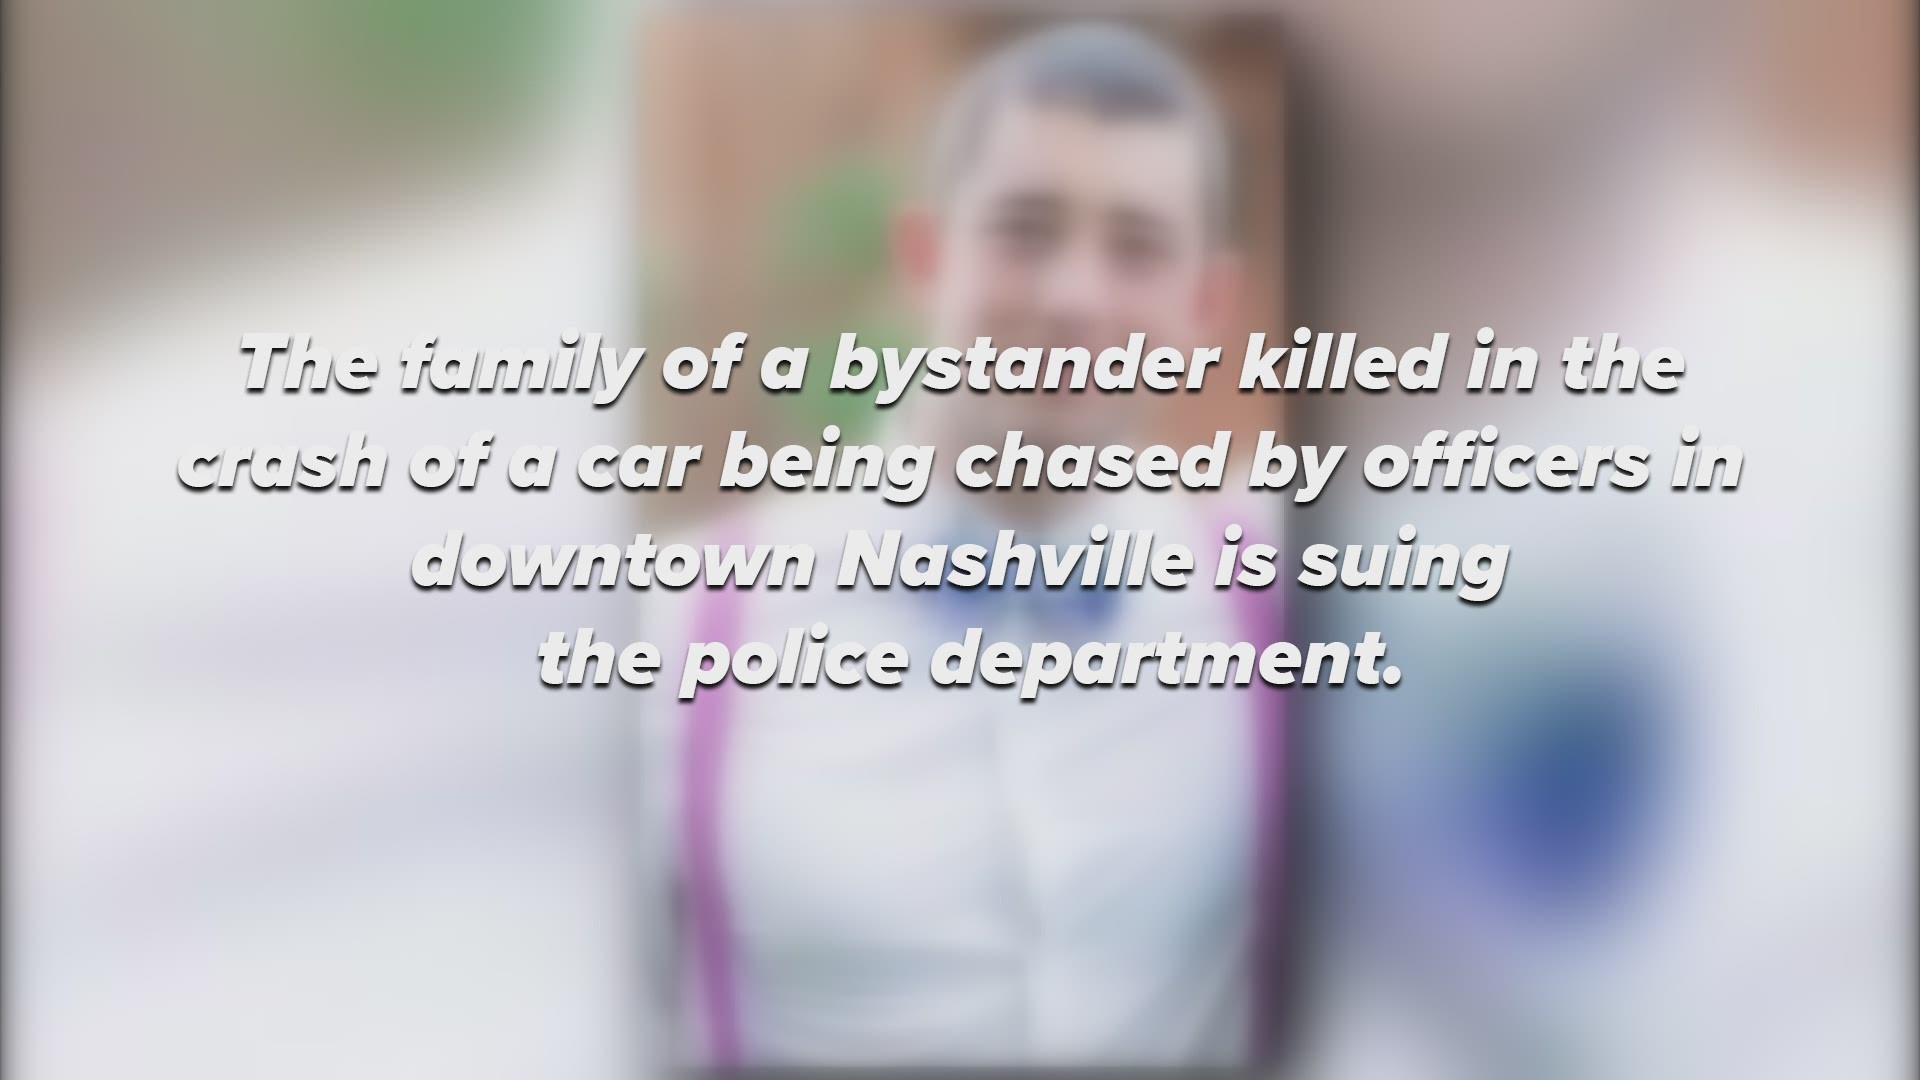 The family of a bystander killed in the crash of a car being chased by officers in downtown Nashville is suing the police department.